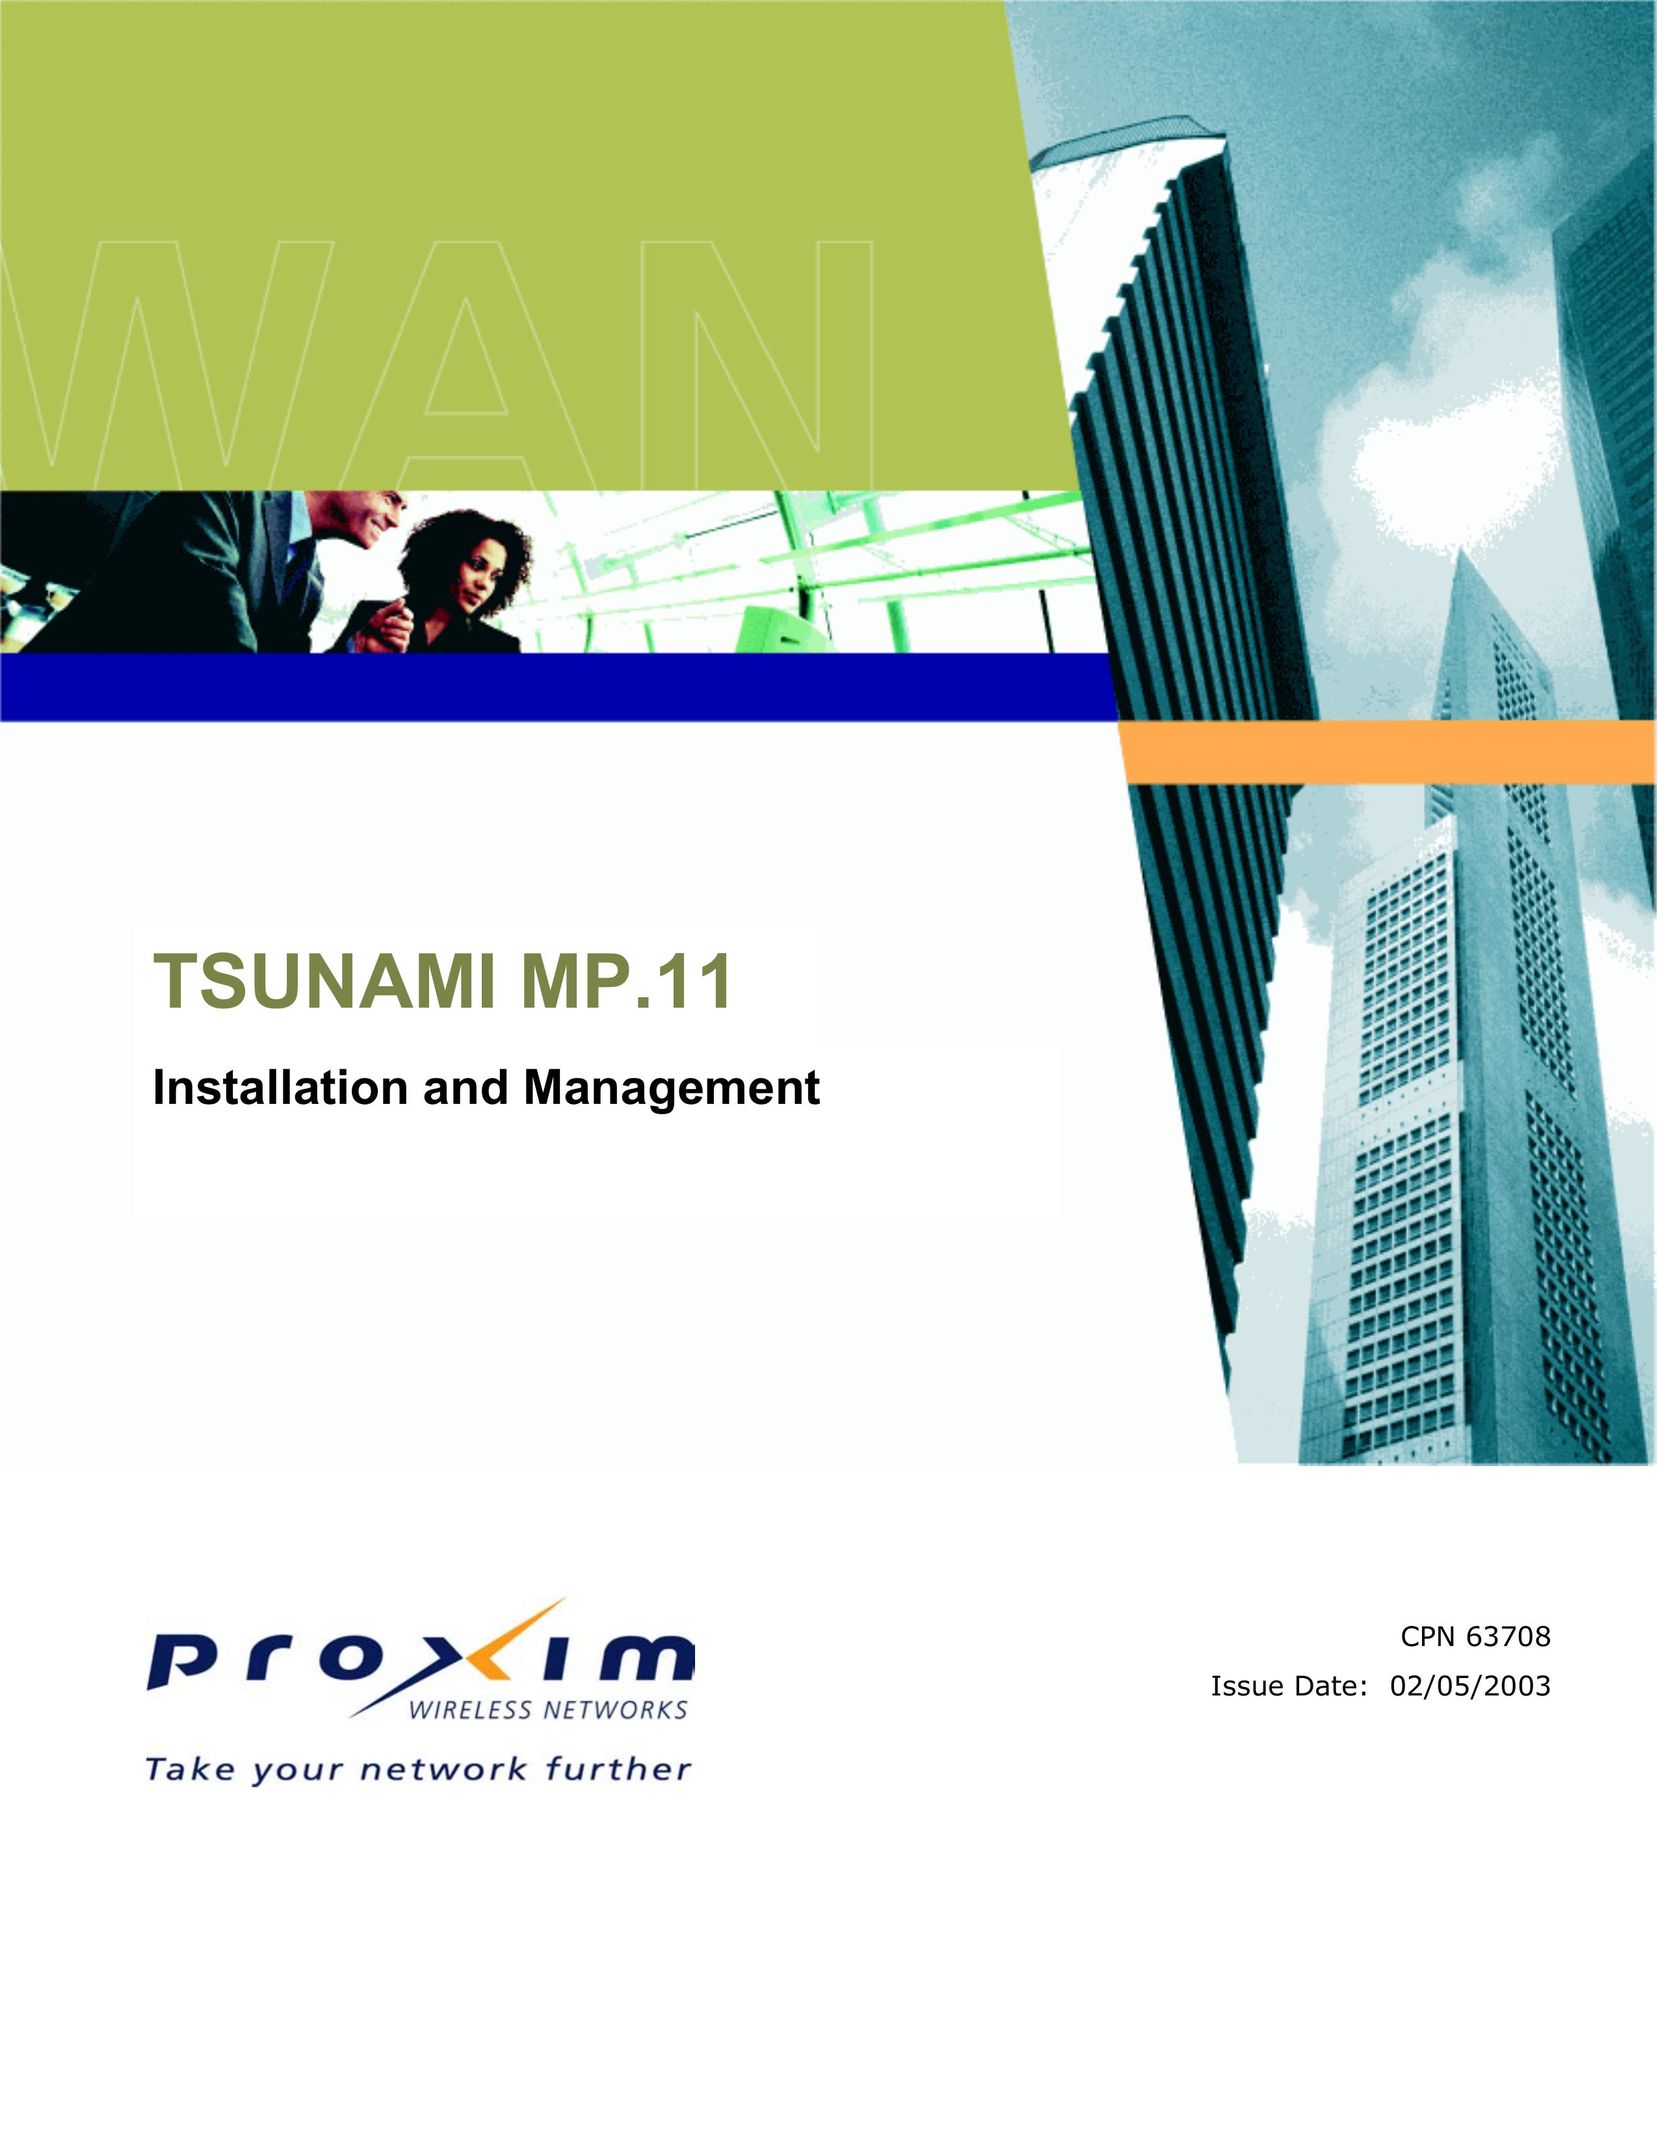 Proxim CPN 63708 Network Router User Manual